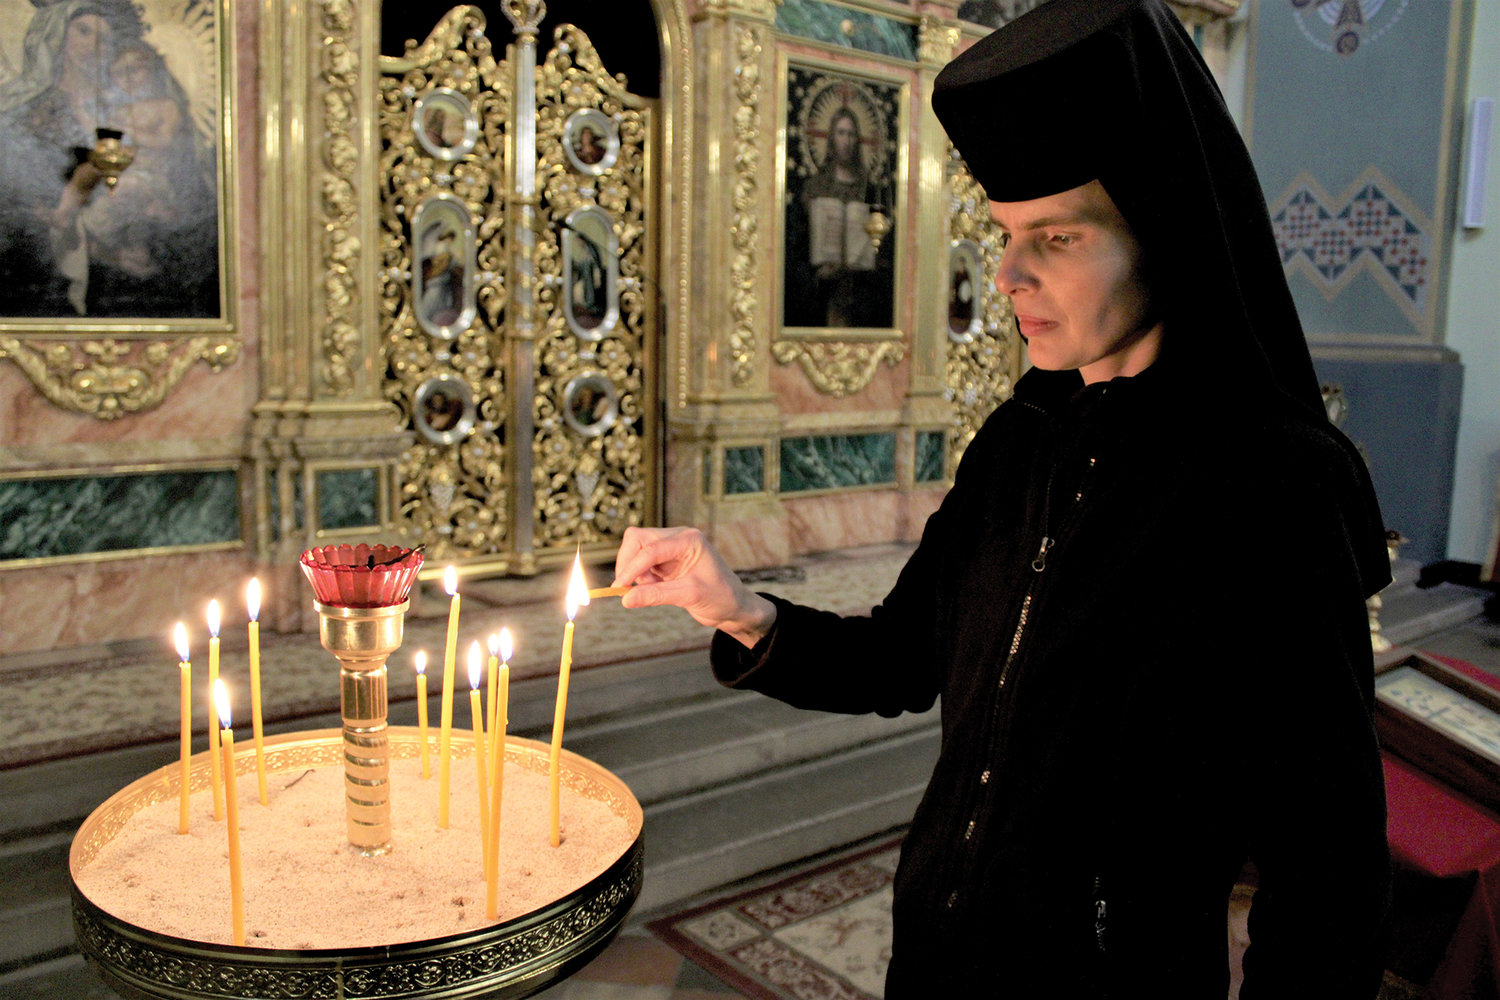 SANCTUARY—Sister Evphrosynia Senyk, a member of the Ukrainian Catholic Church’s St. Joseph Sisters, lights a candle in the sanctuary of the Ukrainian Catholic parish of the Exaltation of the Holy Cross, formerly the Church of St. Norbert, in Krakow, Poland. The church has become a haven for Ukrainians fleeing the Russian war in Ukraine.